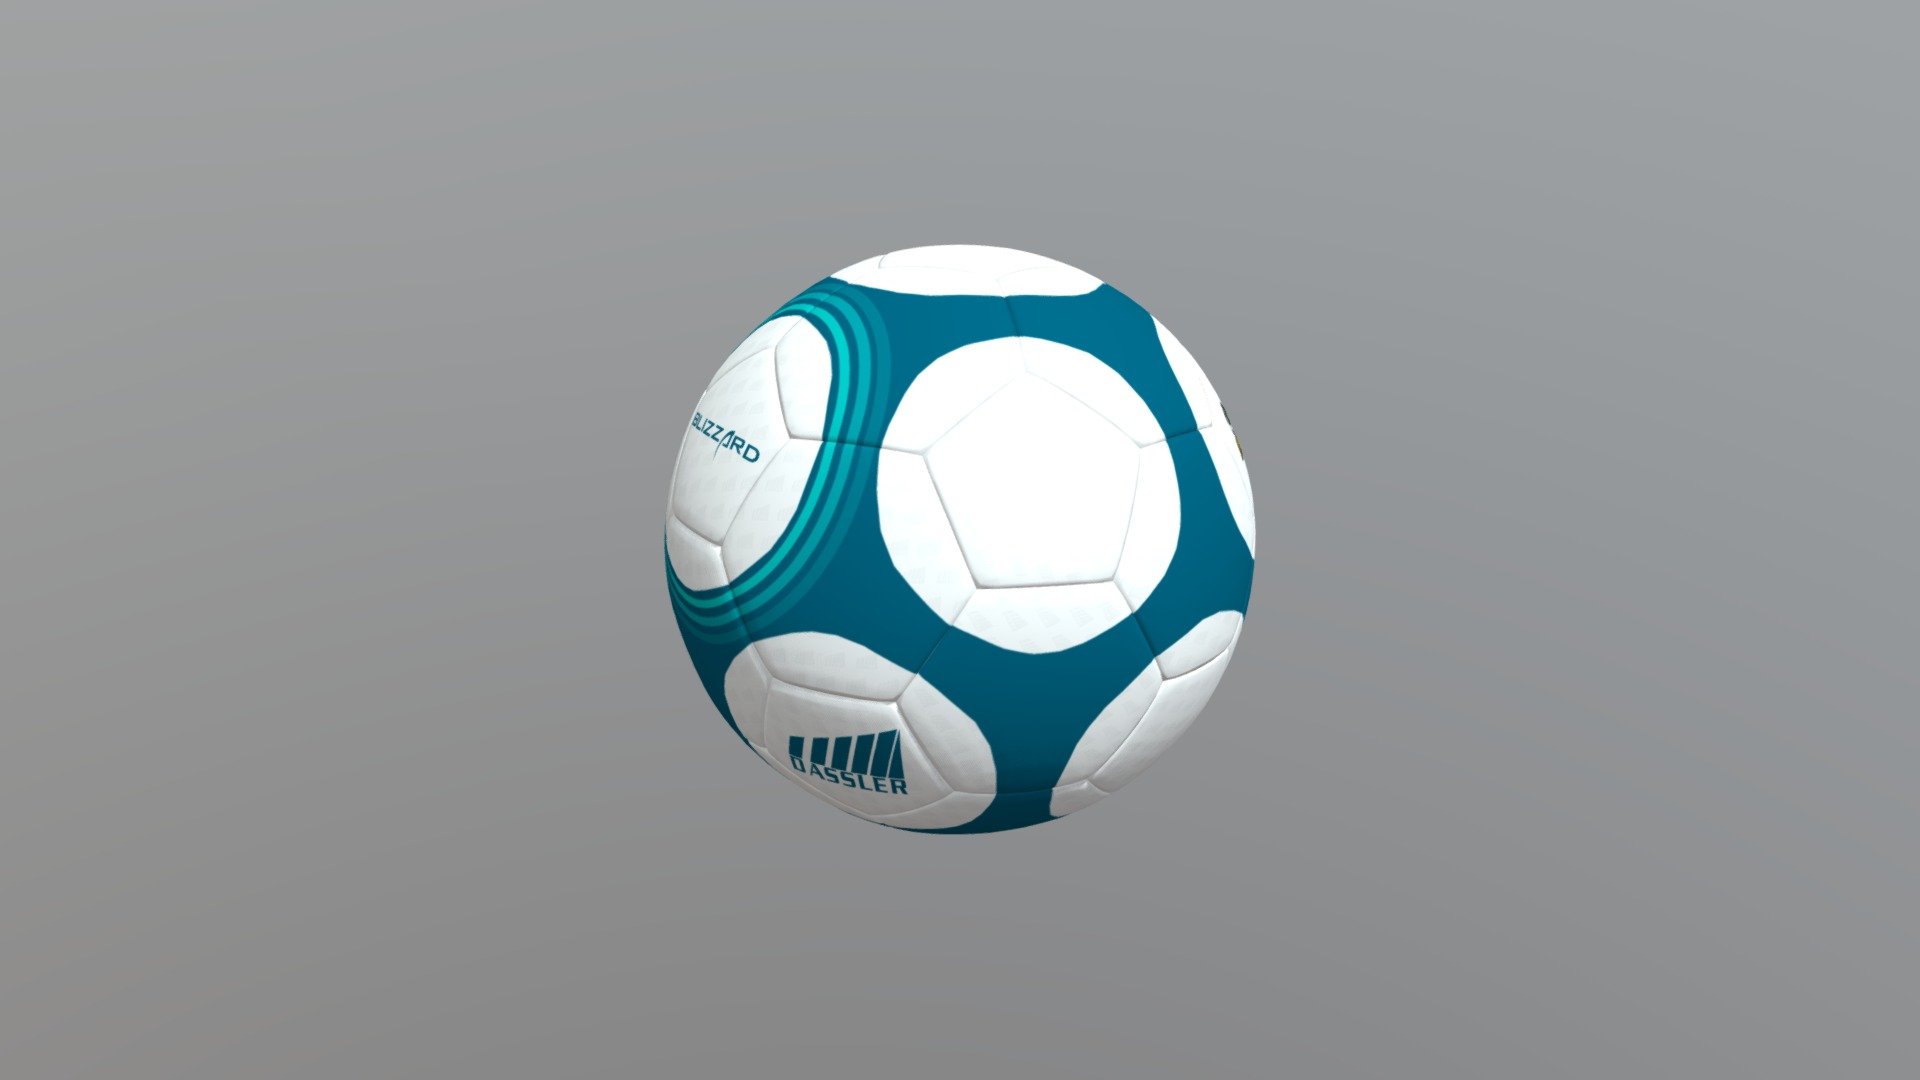 This is a Football/Soccer ball i did for a game I'm currently working. It's based on the Adidas Terrestra Silverstream. Everything you can see was 100% modelled, designed or drawn by me 3d model